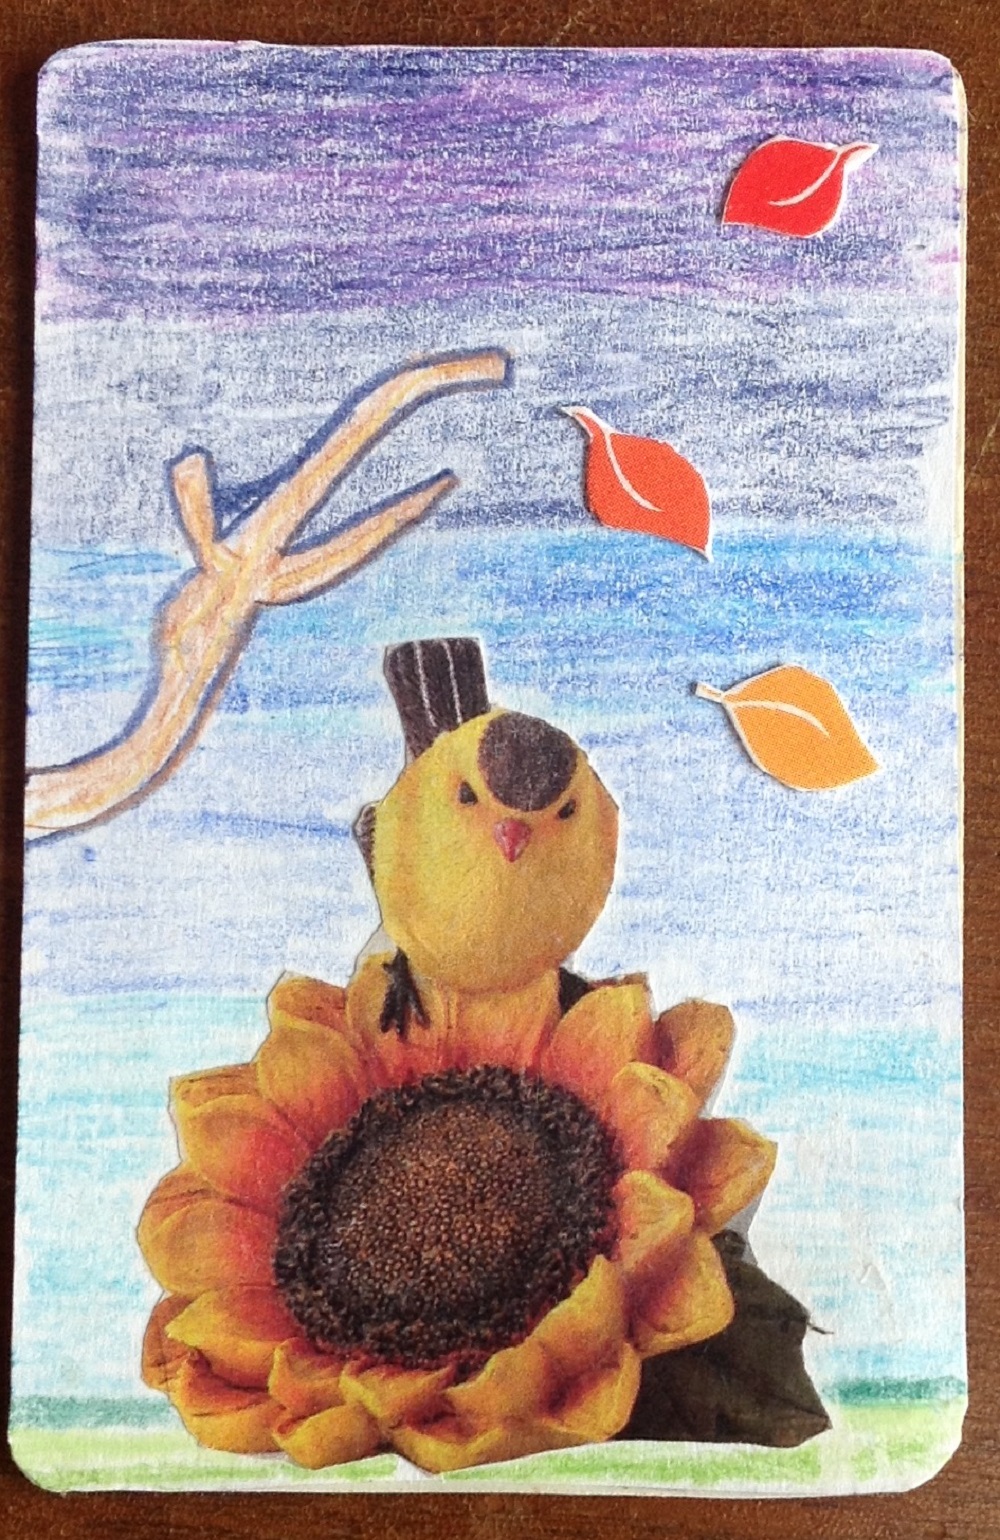 Artist Trading card made my me entitled 'Memories of Summer'